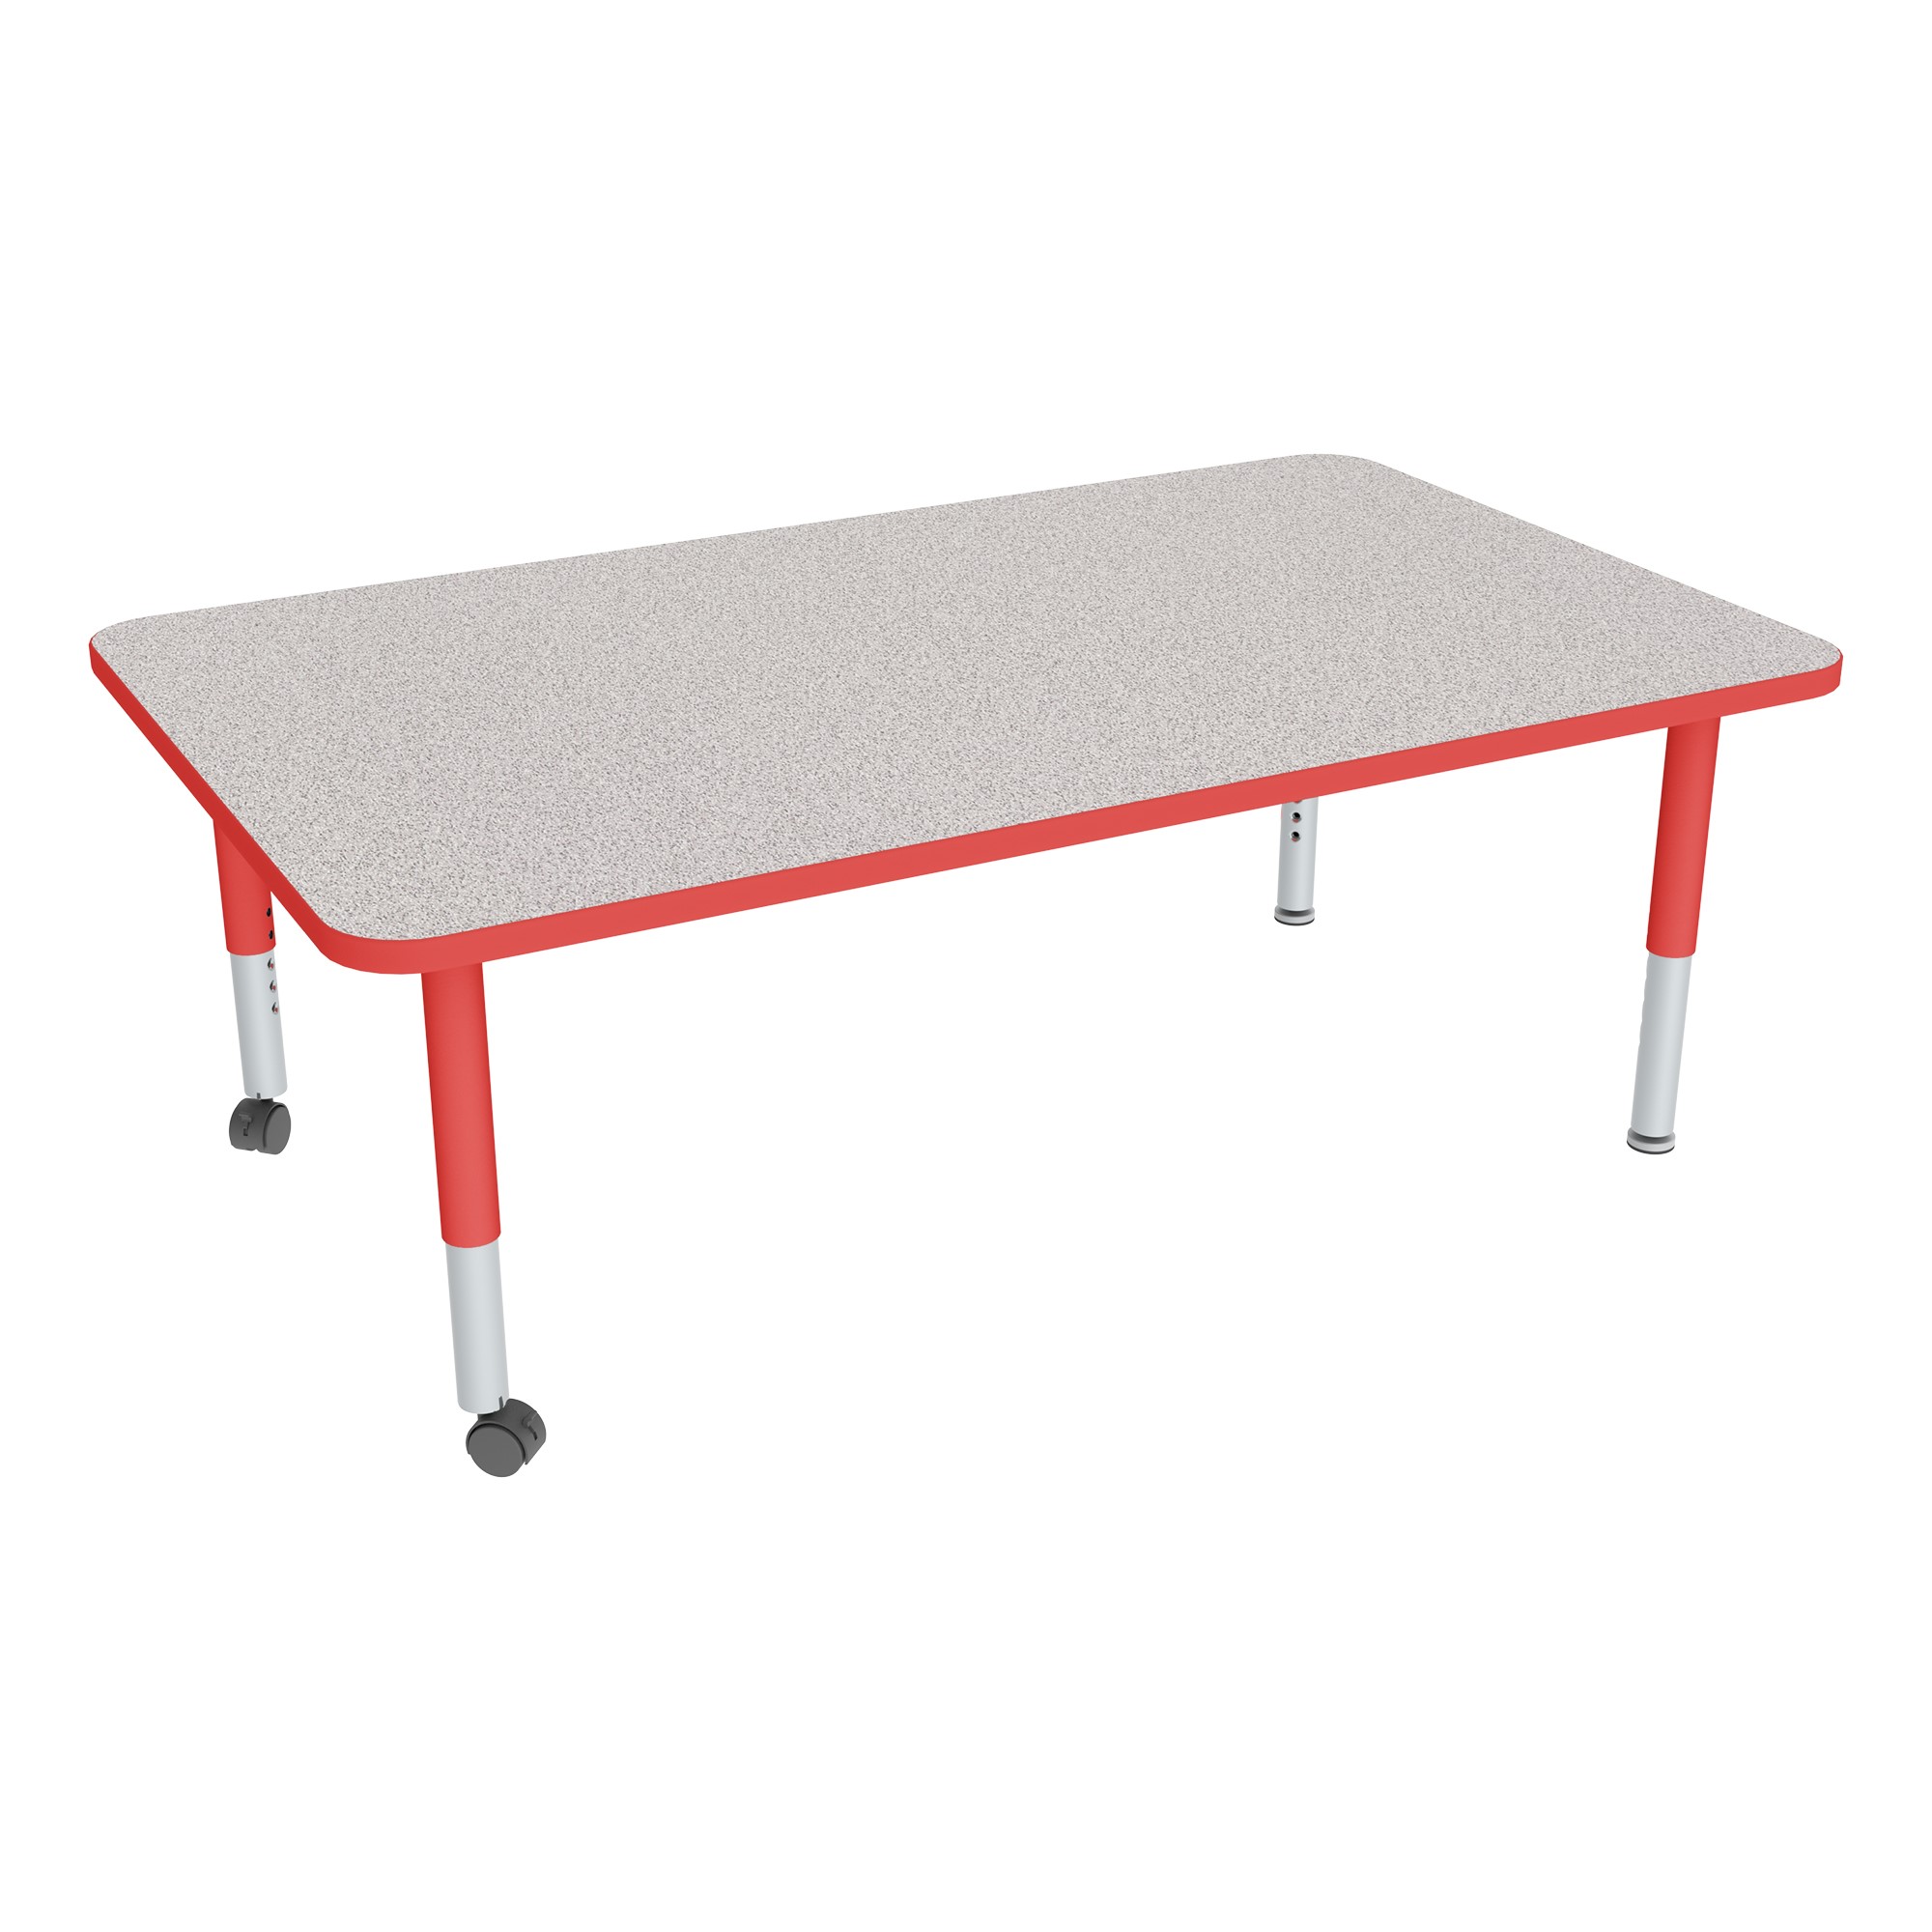 Rectangle Adjustable-Height Mobile Preschool Activity Table 24 W x 60 L